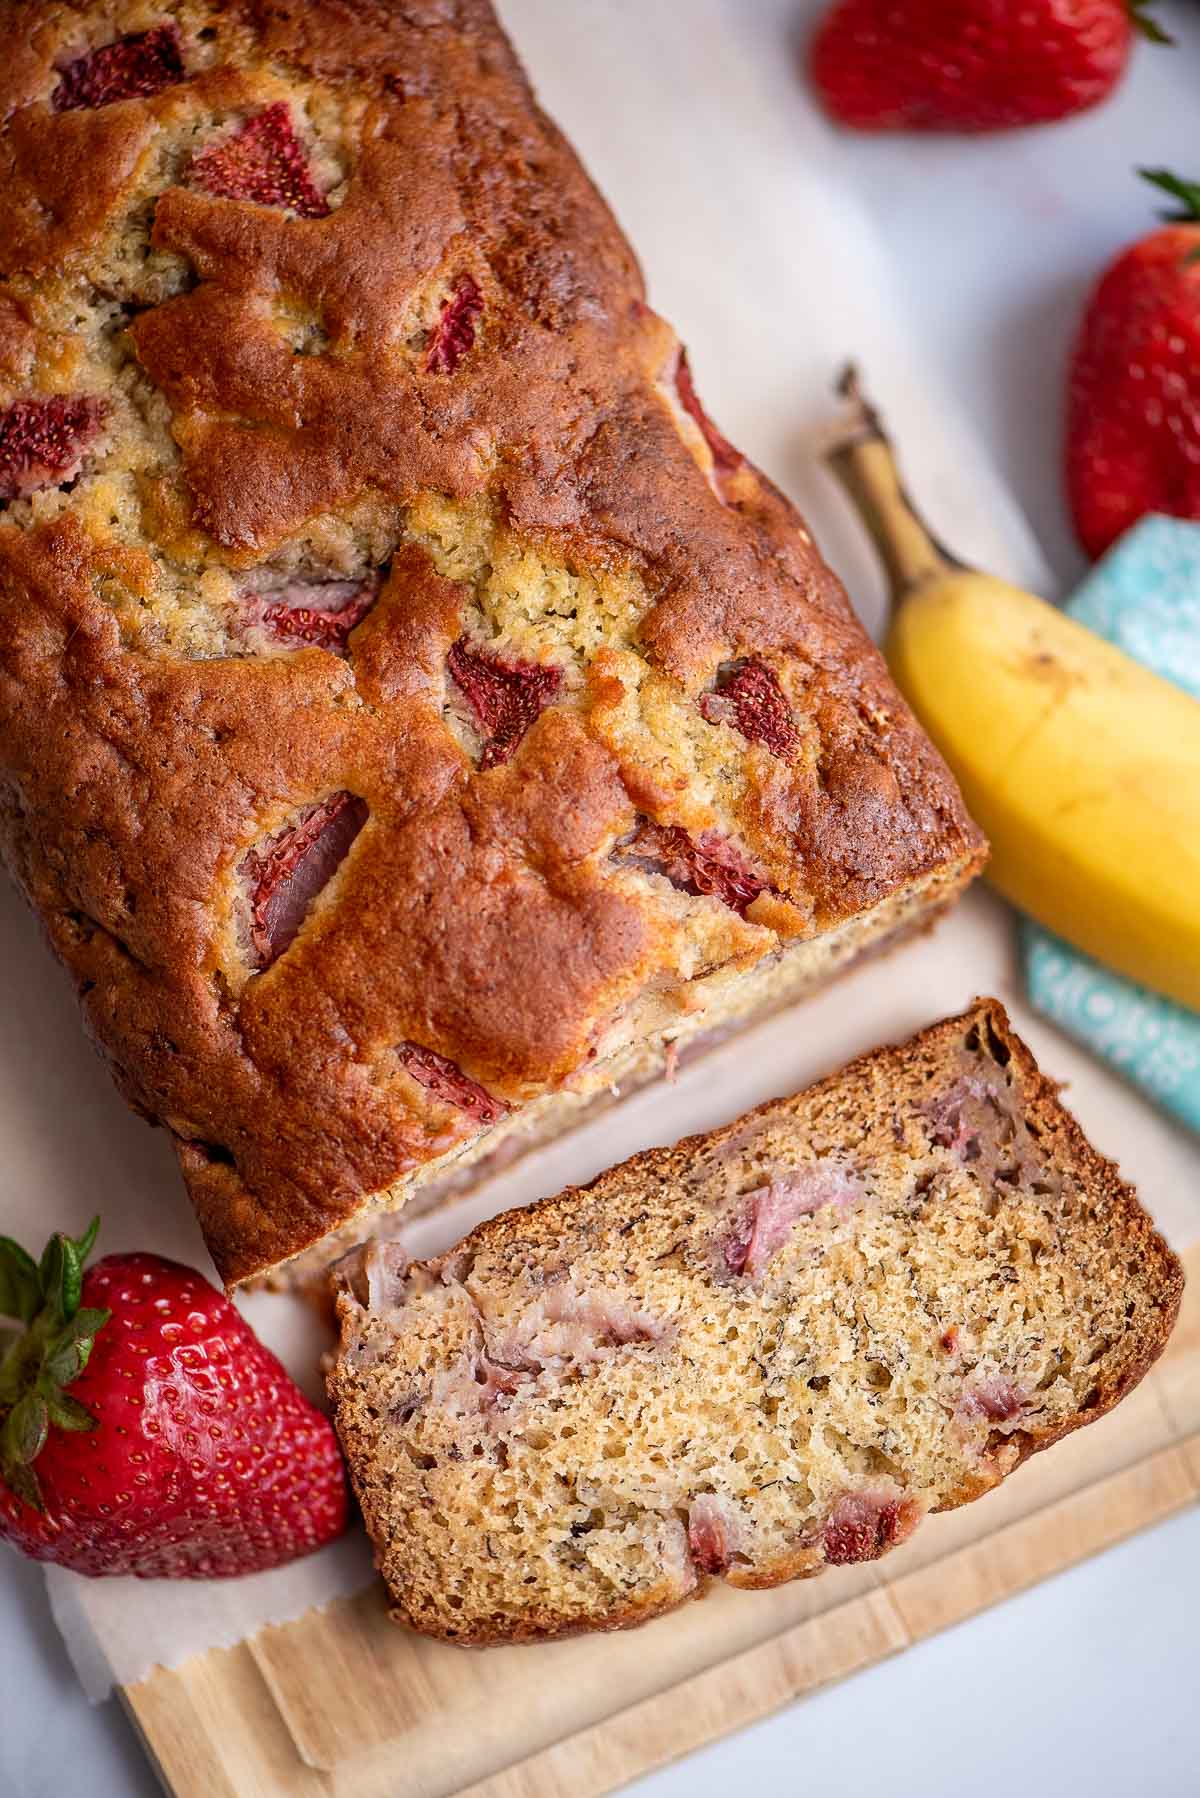 strawberry banana bread slice and loaf